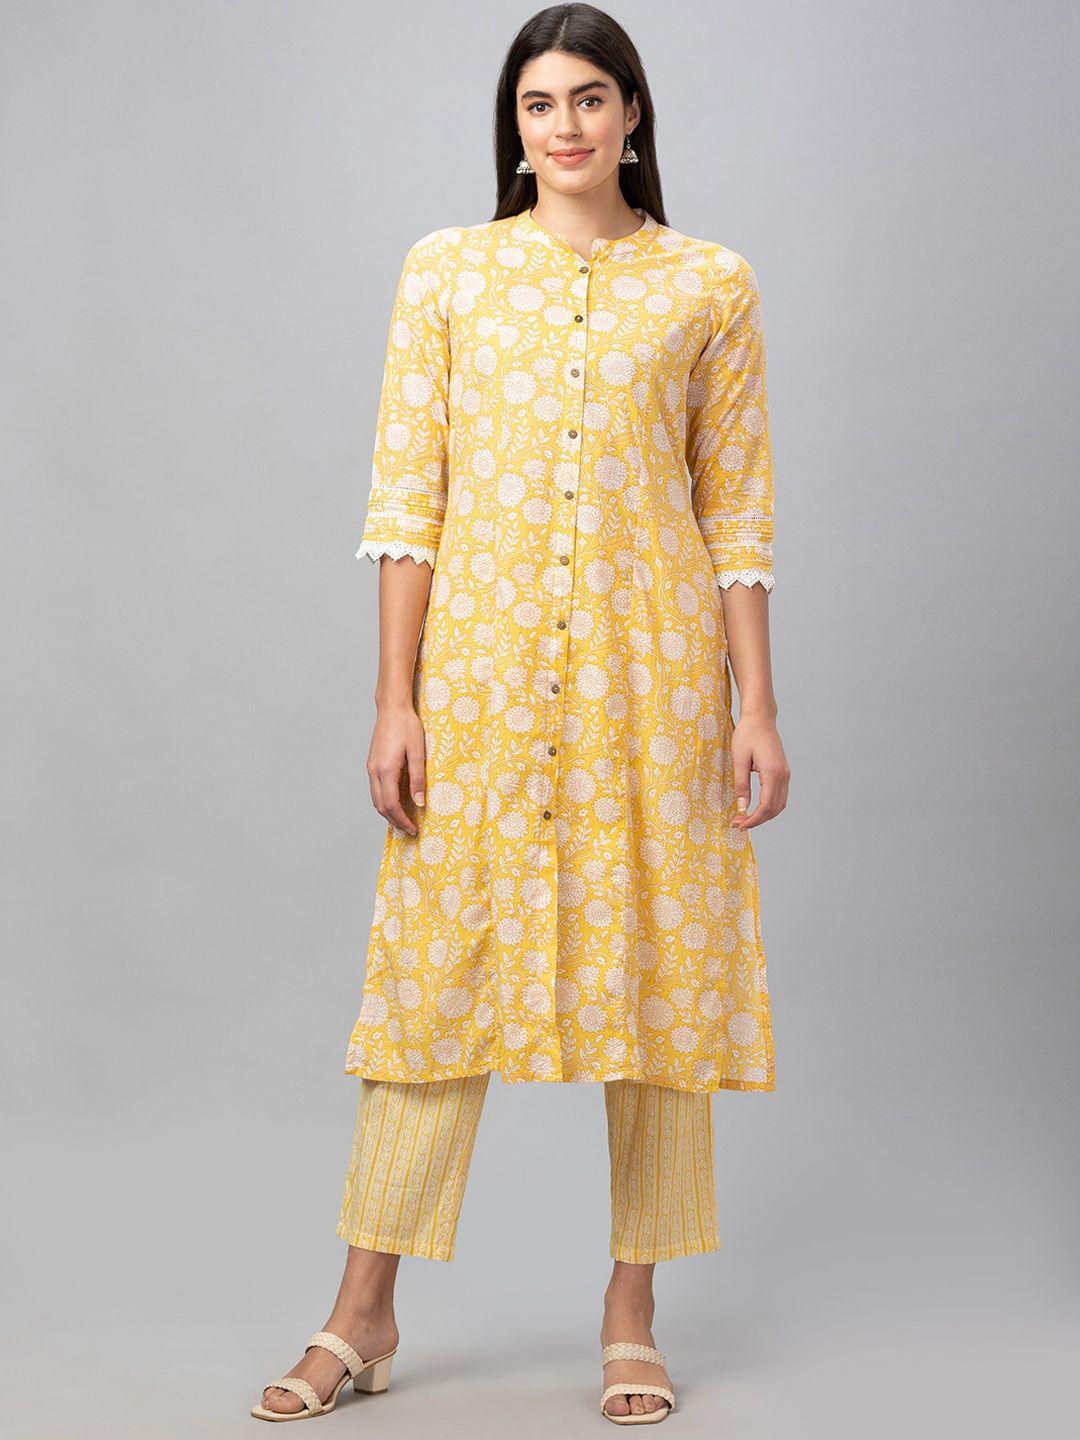 globus-women-floral-printed-pure-cotton-kurta-with-trousers